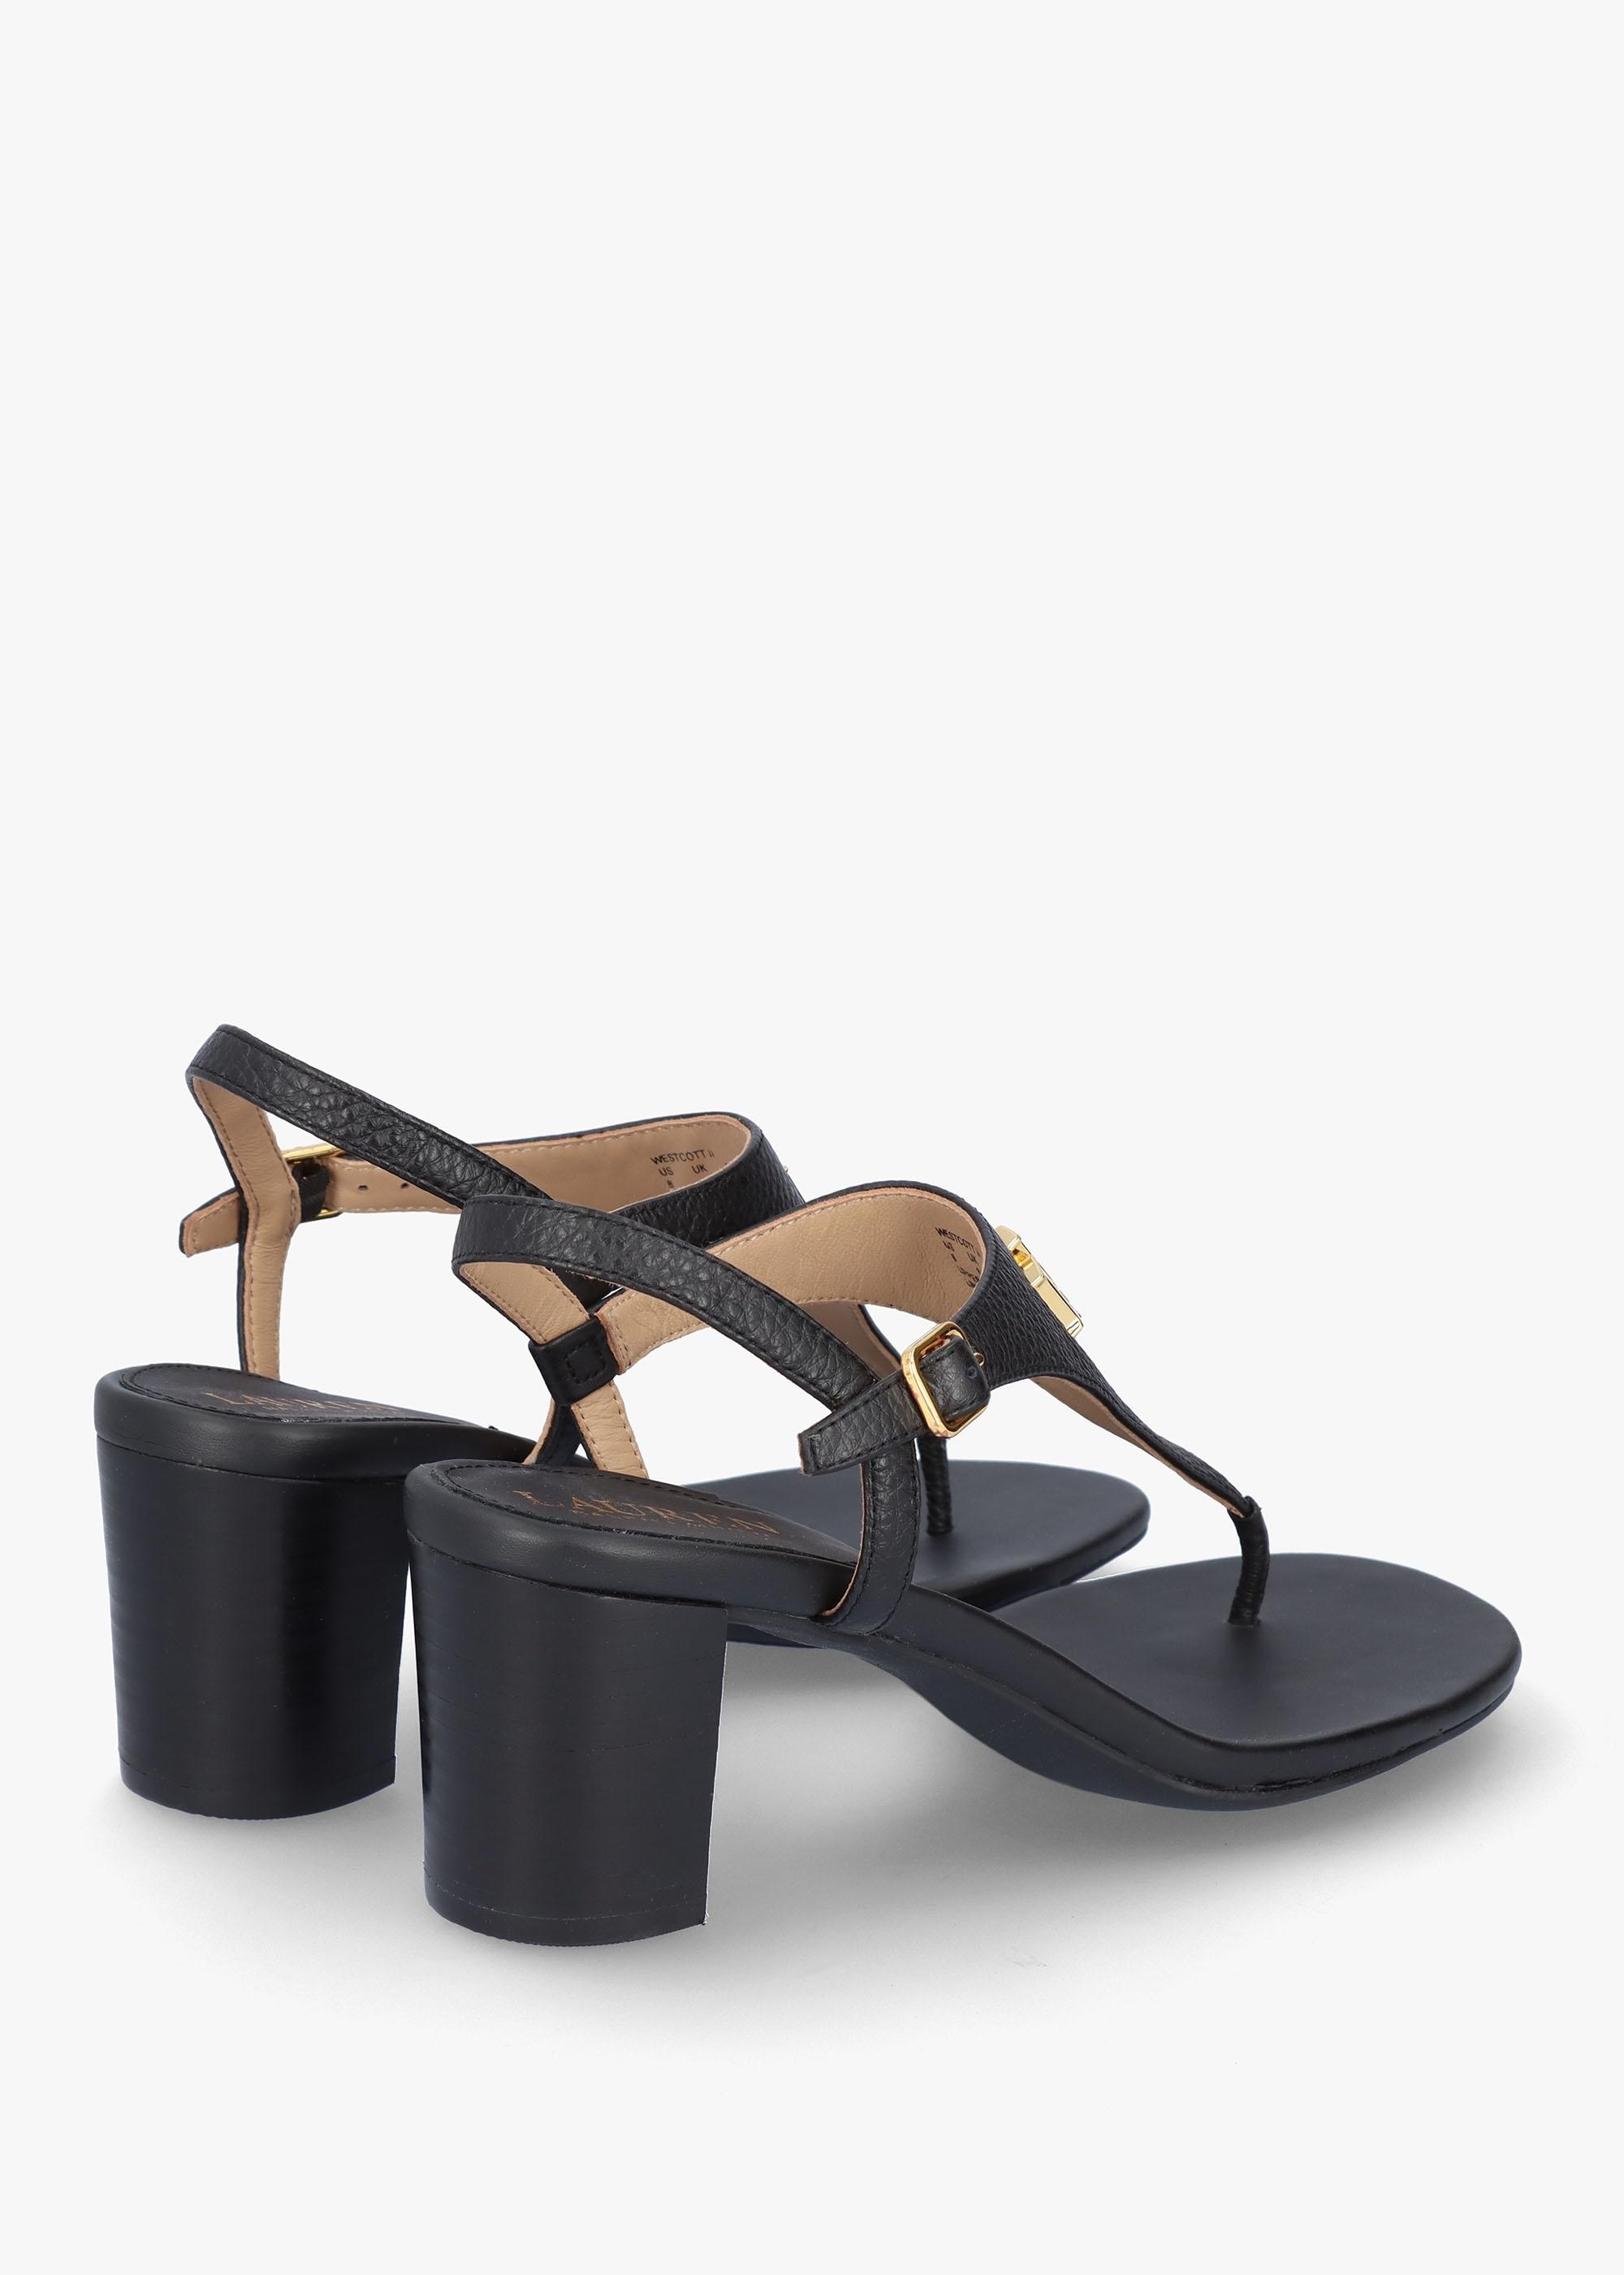 Women's Silver Sandals | Explore our New Arrivals | ZARA United States